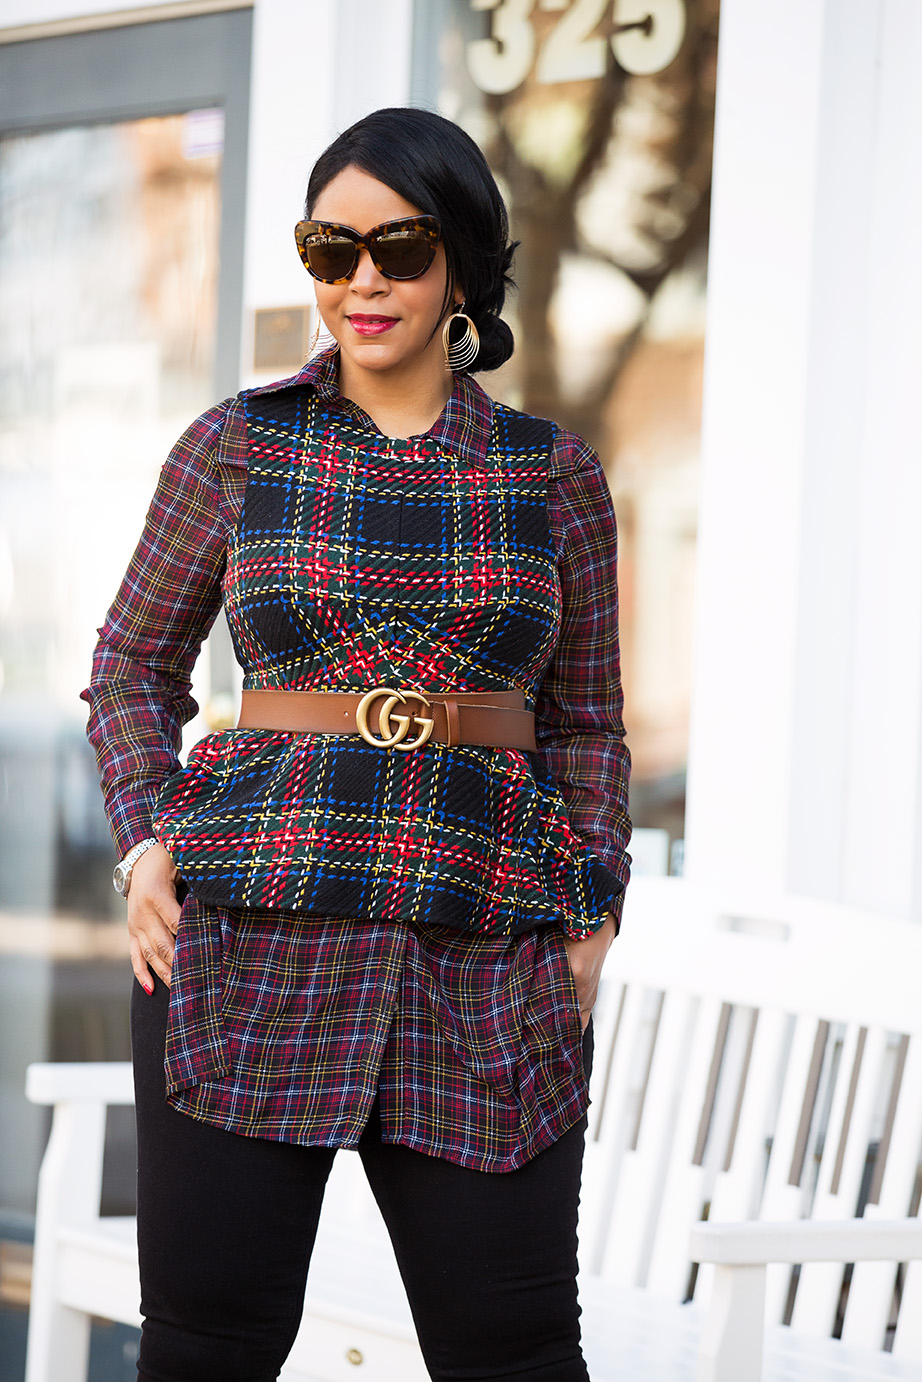 Style in a Cinch: What I'm Wearing - ASOS Tartan Peplum Top, Sheer Plaid Shirt, Gucci Ayers Leather belt with double G buckle, Topshop Step Hem Jeans, Christian Louboutin Pigalle 100 black leather pumps, What's Haute